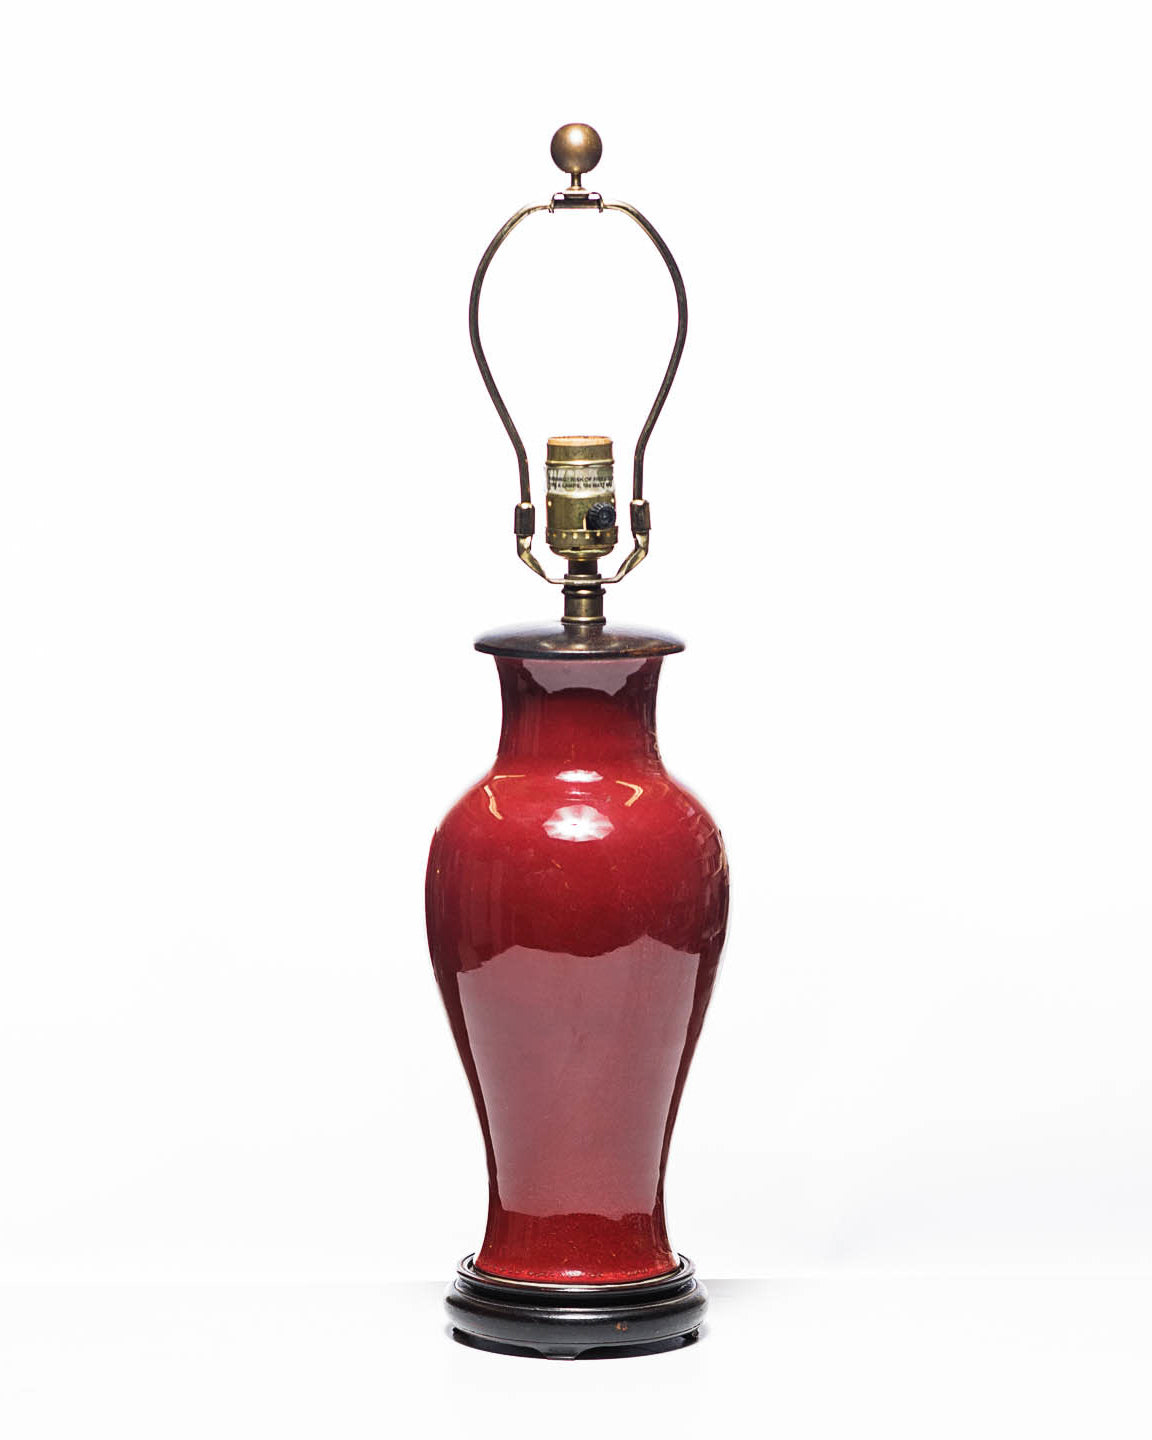 Lawrence & Scott Legacy Gabrielle Porcelain Lamp in Pinot Red with Rosewood Base